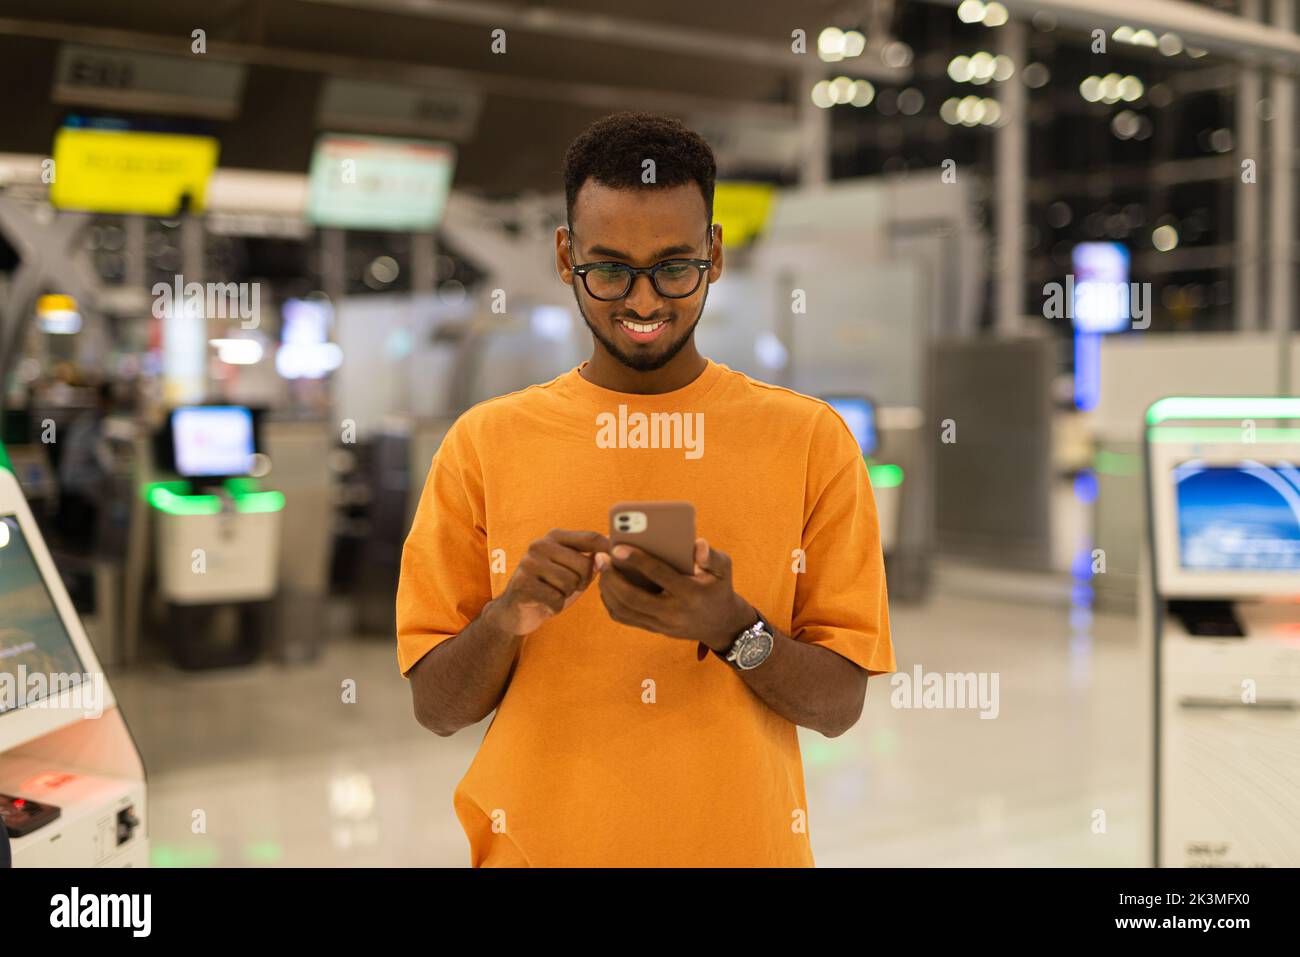 Young handsome black man ready to travel at airport terminal waiting for flight while using phone Stock Photo